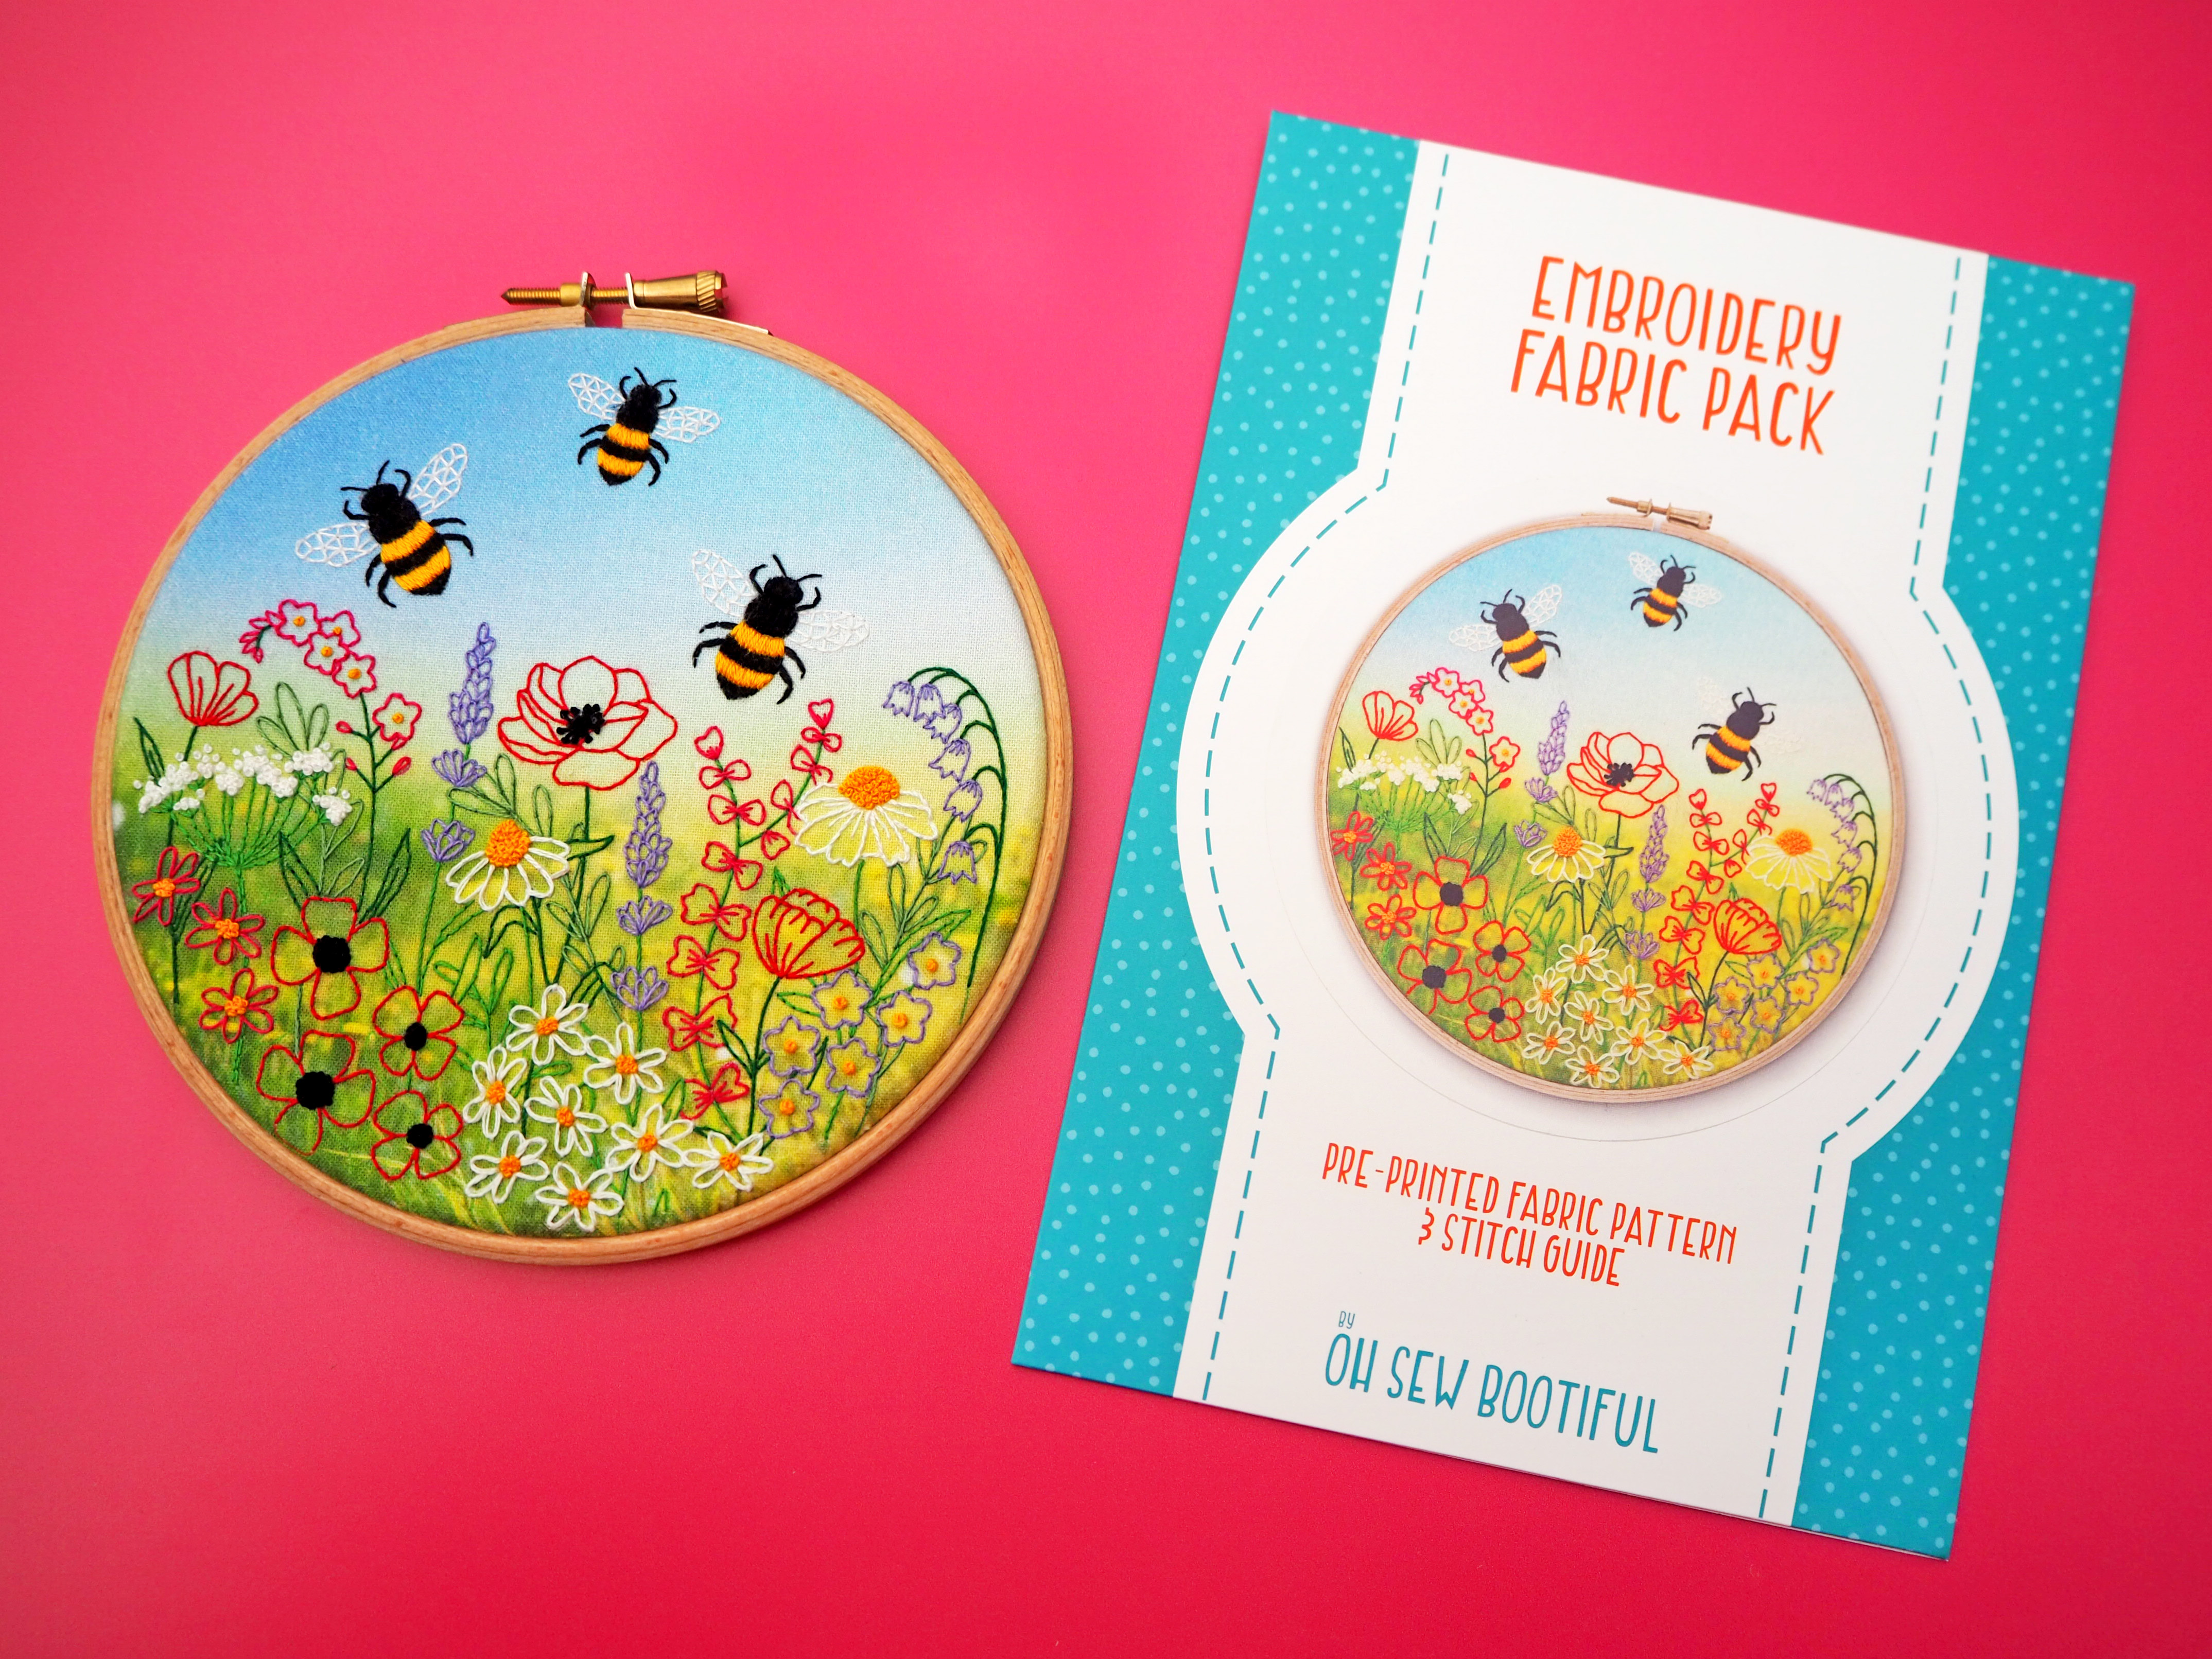 a embroidery hoops with bees and flowers